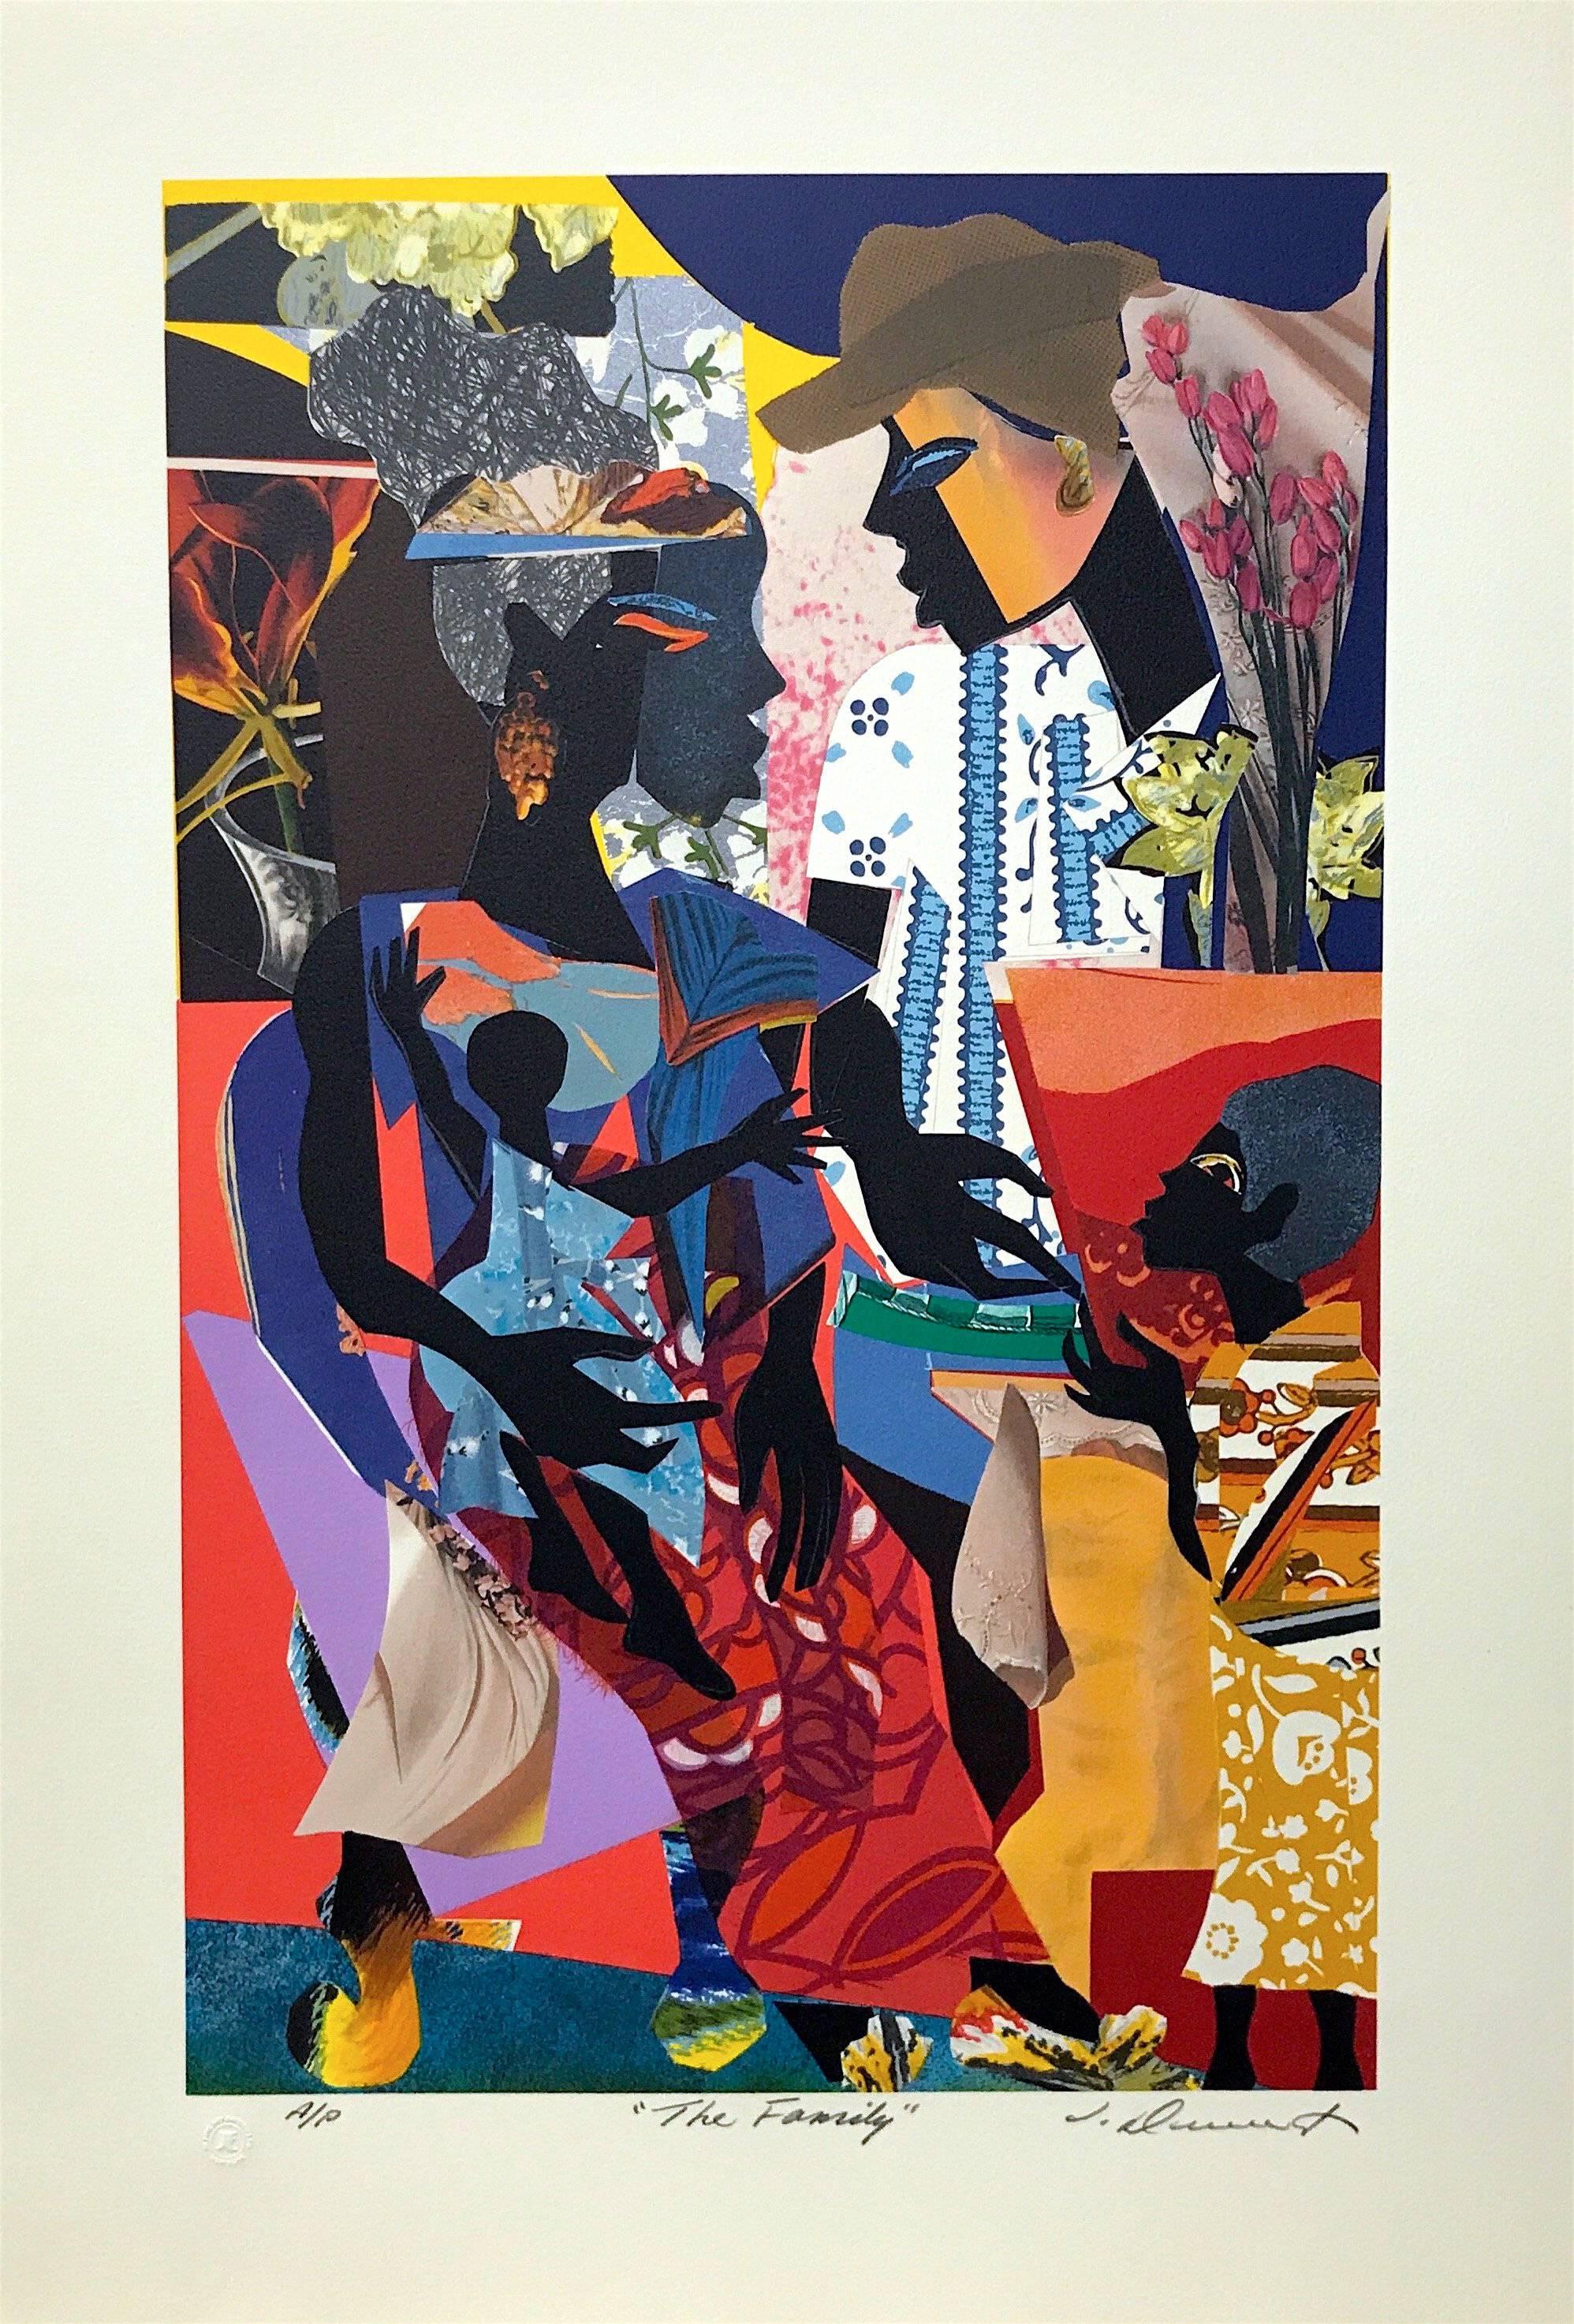 THE FAMILY, Signed Lithograph, Multicolor Collage, African American Heritage - Print by James Denmark